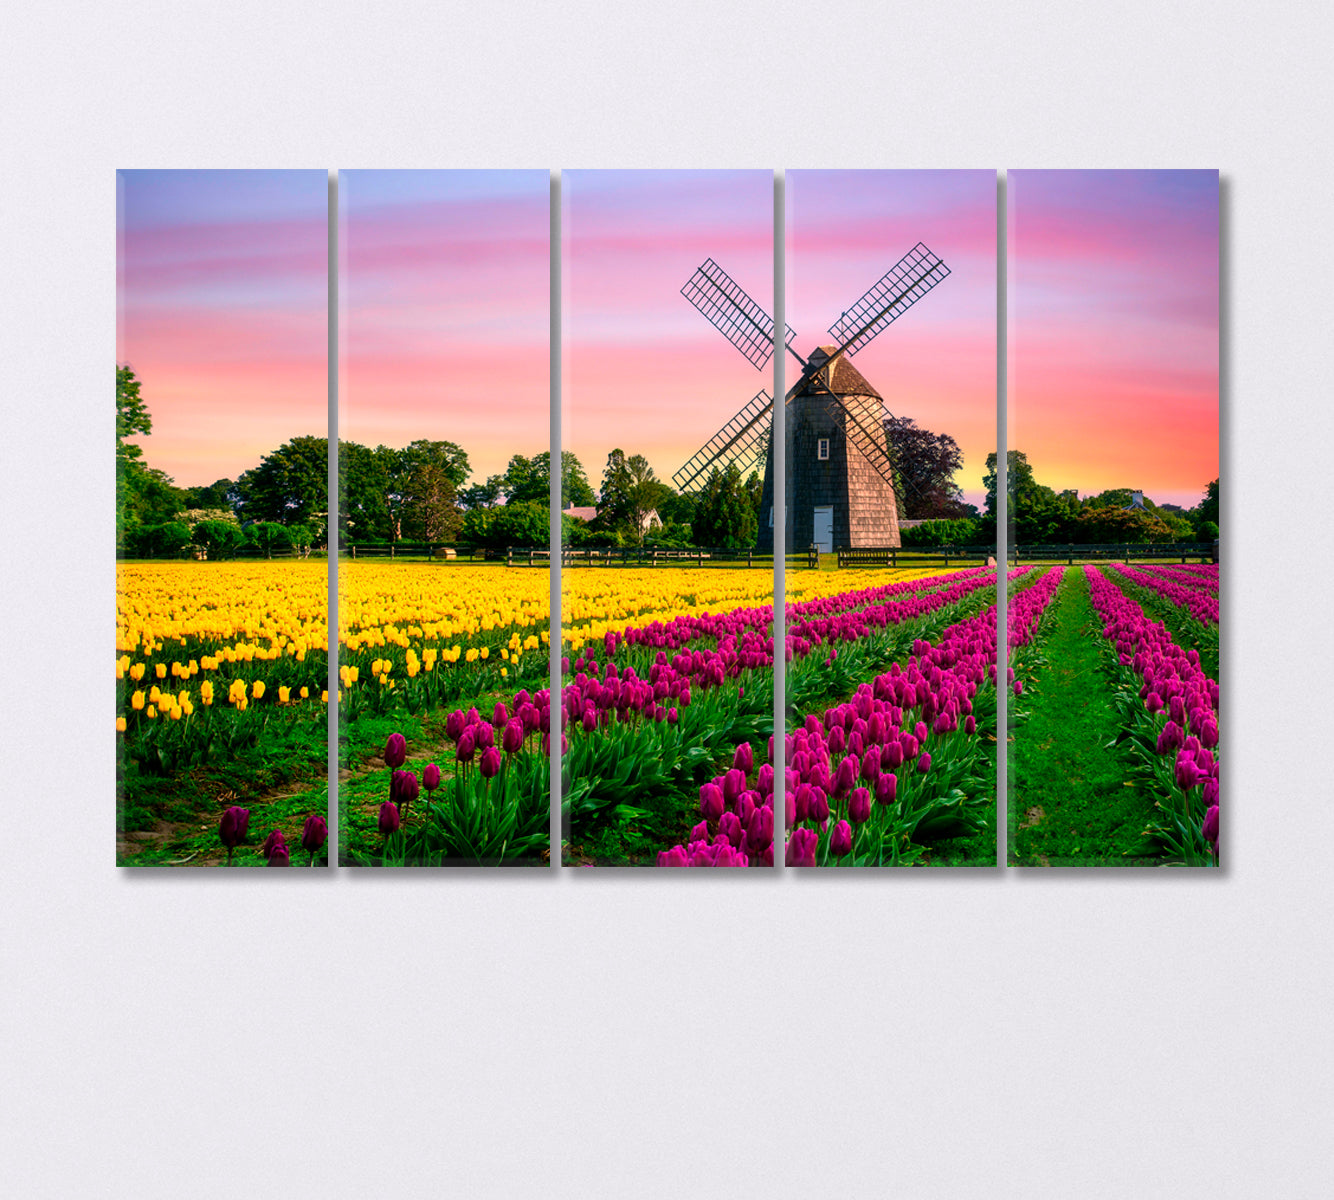 Windmill in Beautiful Color Tulips Field Canvas Print-Canvas Print-CetArt-5 Panels-36x24 inches-CetArt